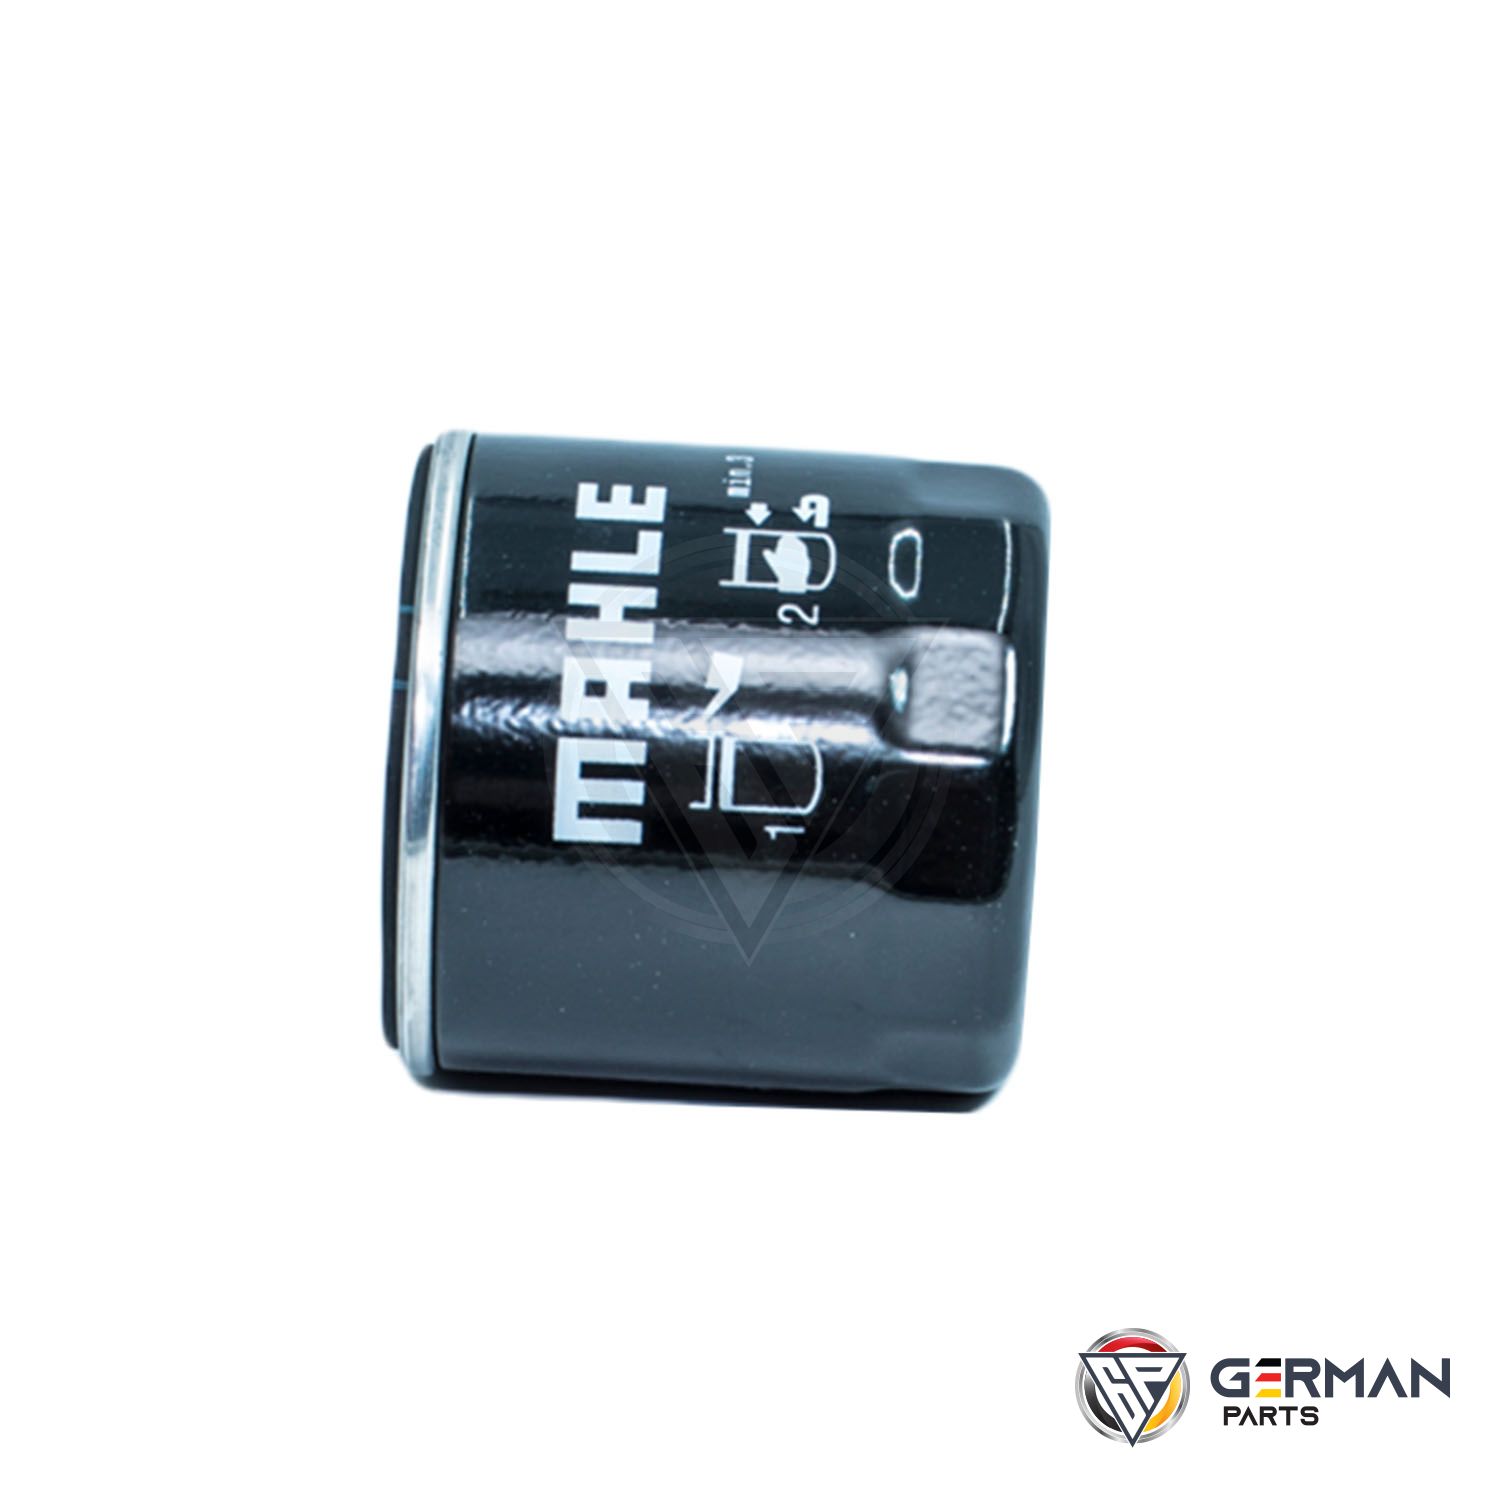 Buy Mahle Oil Filter 04E115561H - German Parts